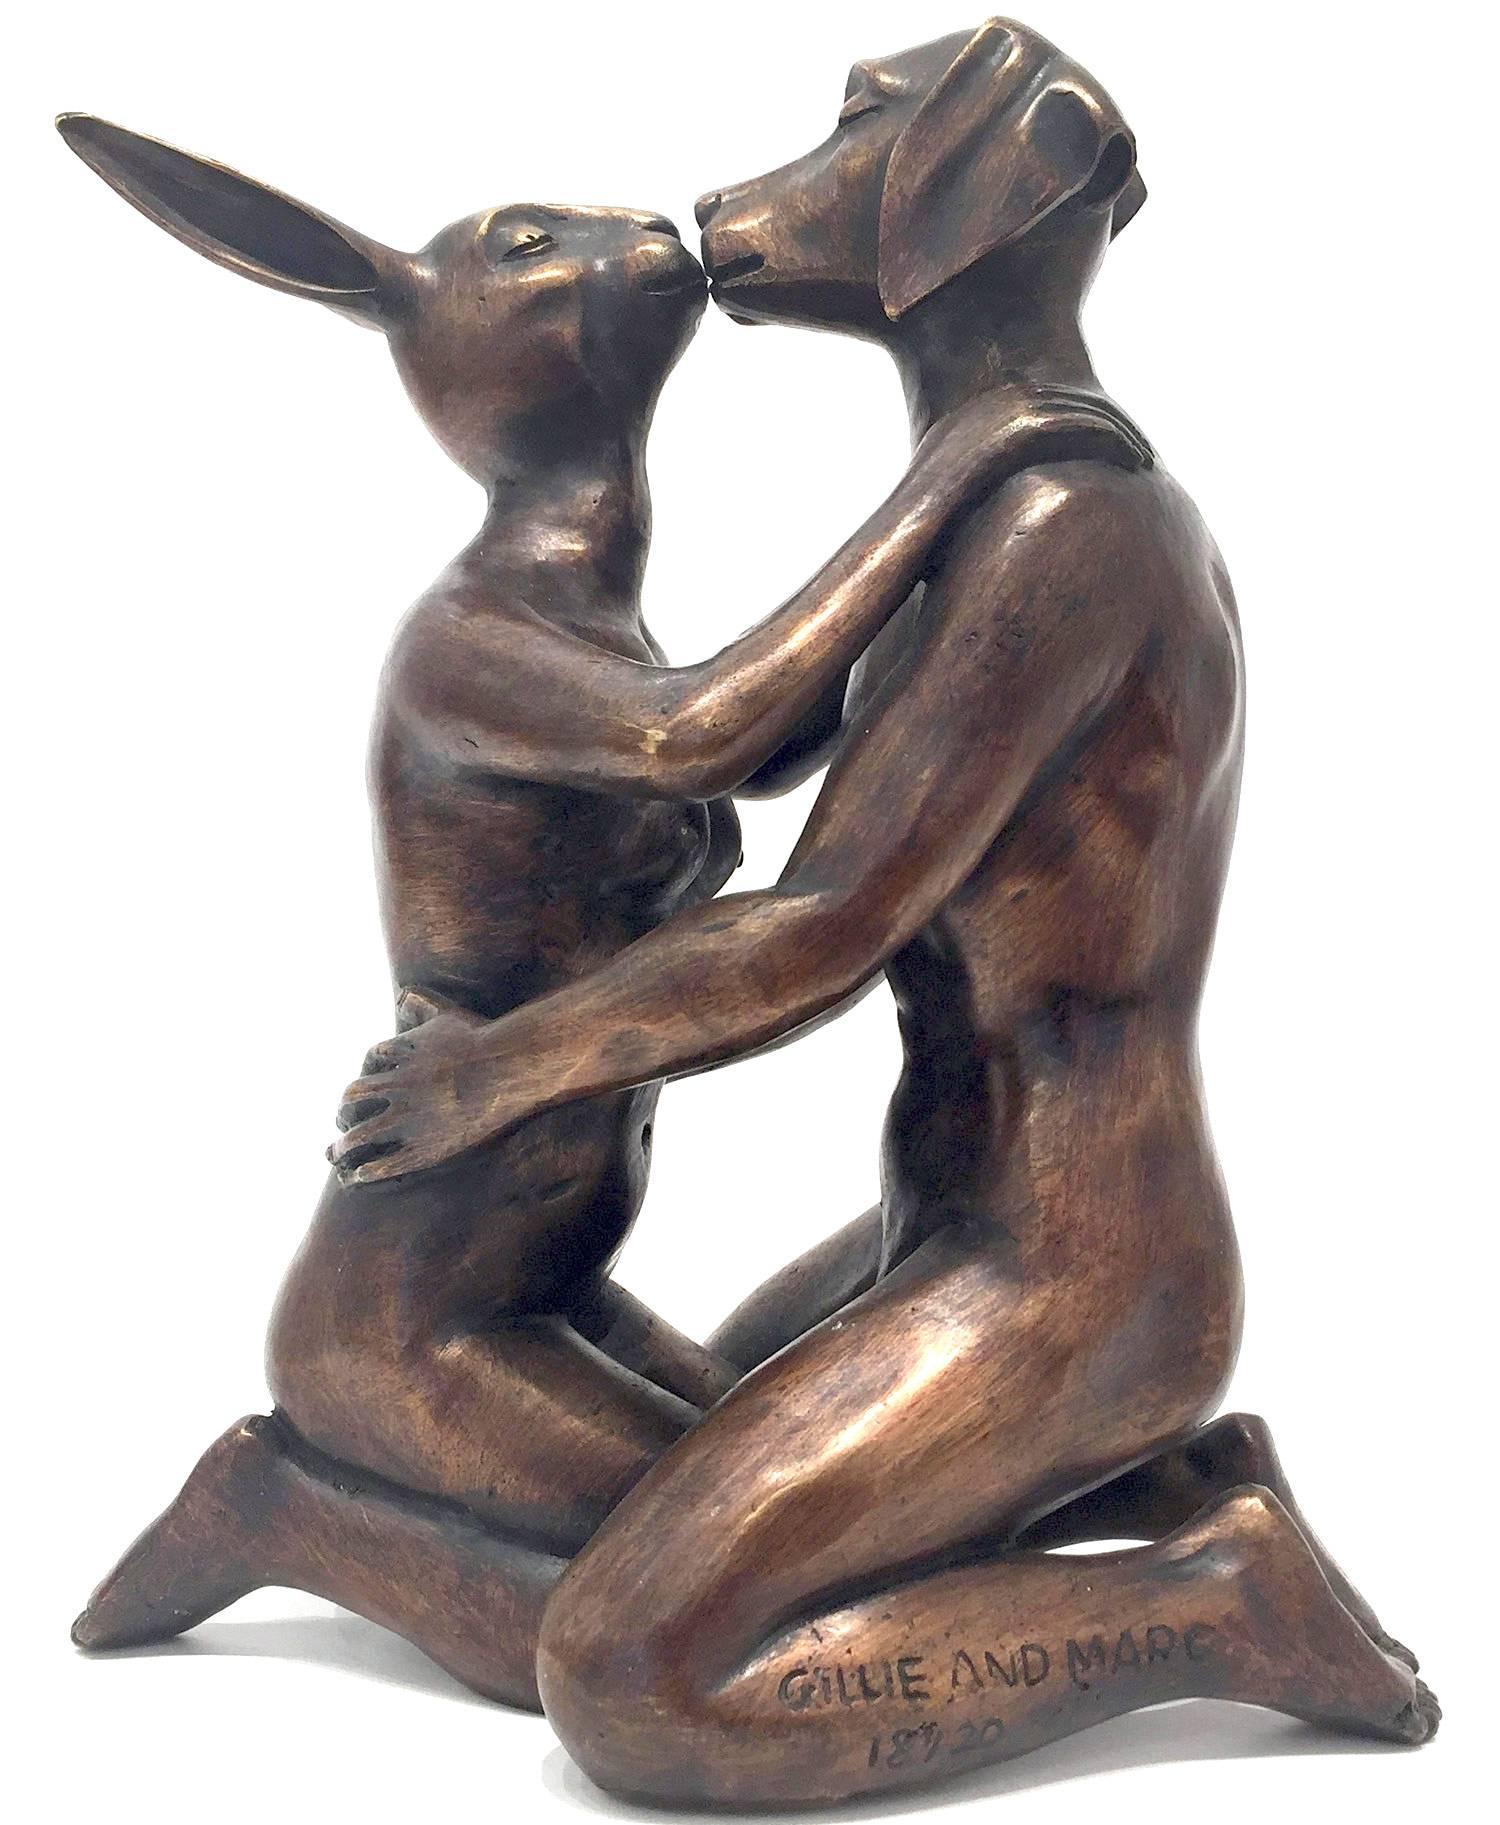 She hoped this Kiss would Last Forever (Weim and Rabbit) - Sculpture by Gillie and Marc Schattner